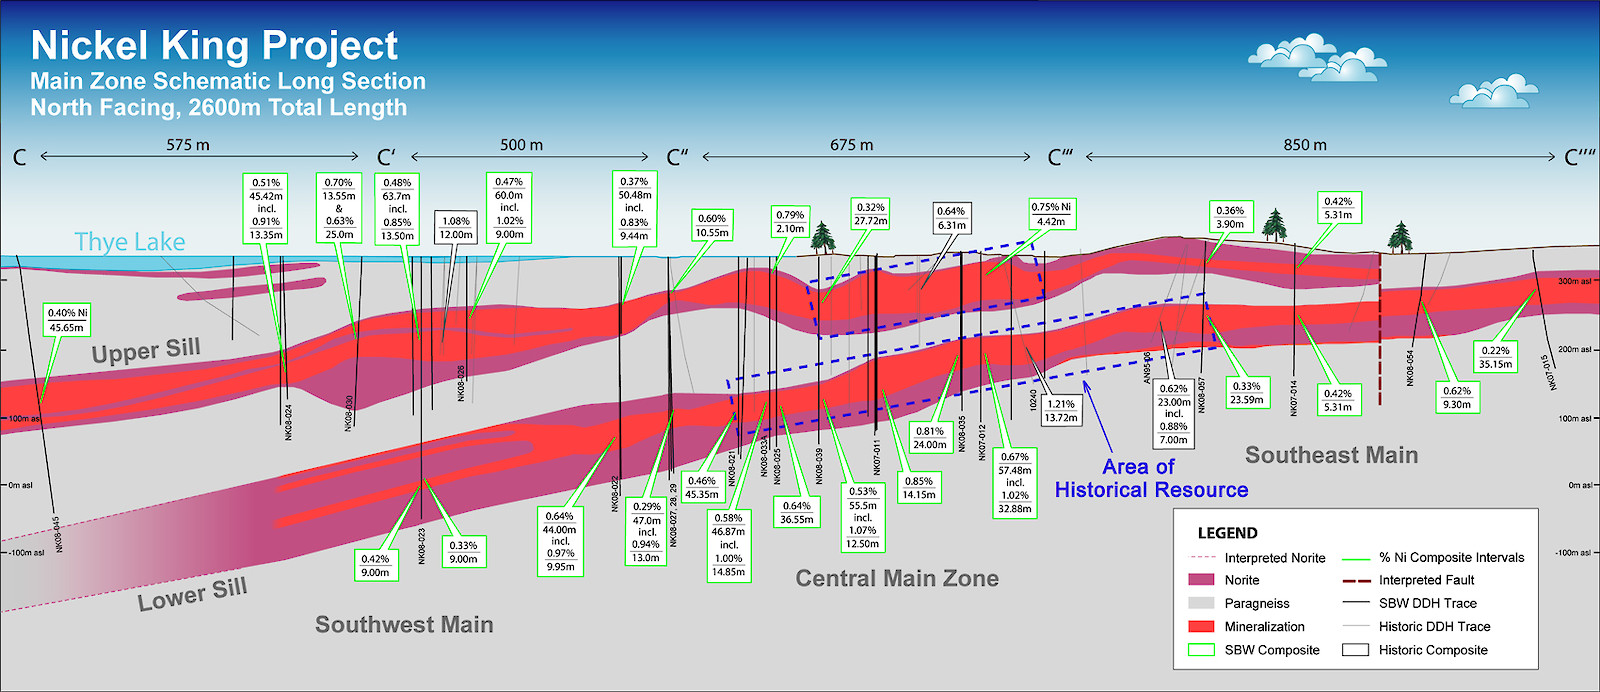 Main Zone Schematic Long Section